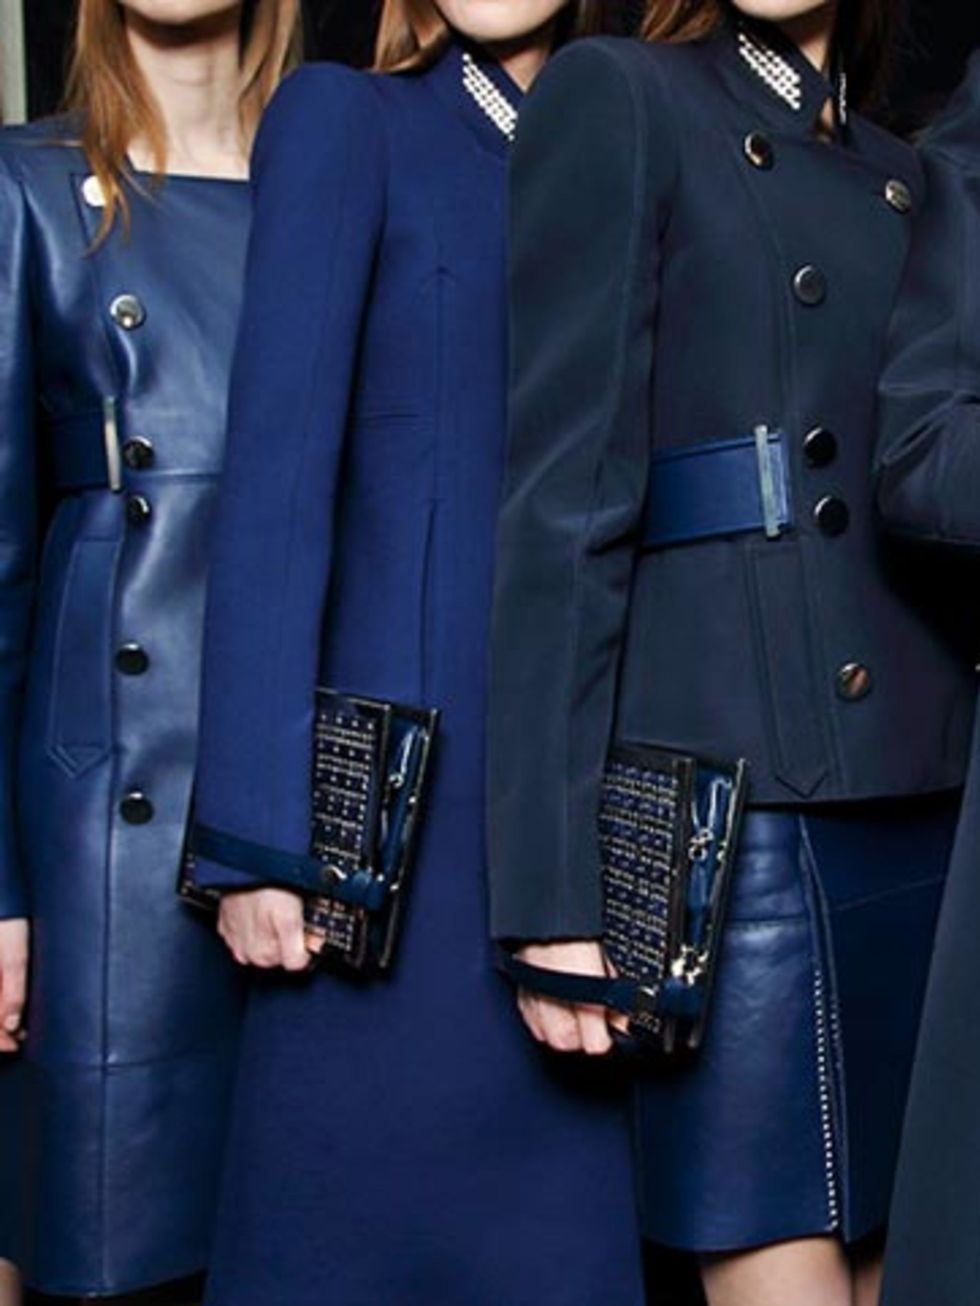 The autumn/winter 13 Catwalk Report: In the Navy